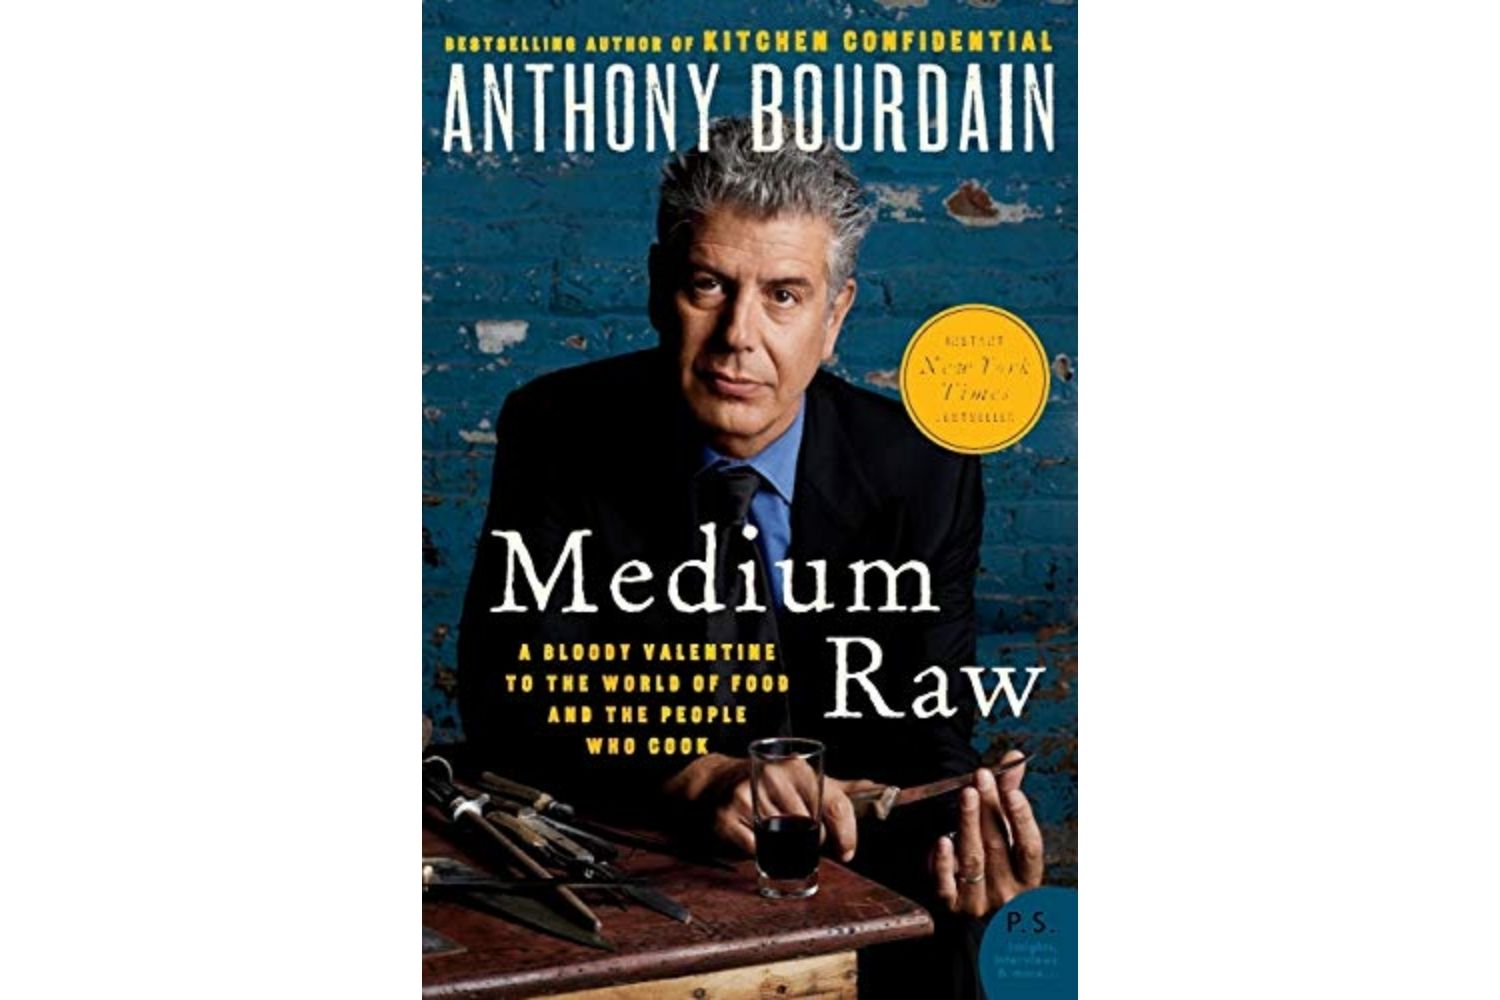 The Best Travel Gifts Option: Medium Raw by Anthony Bourdain